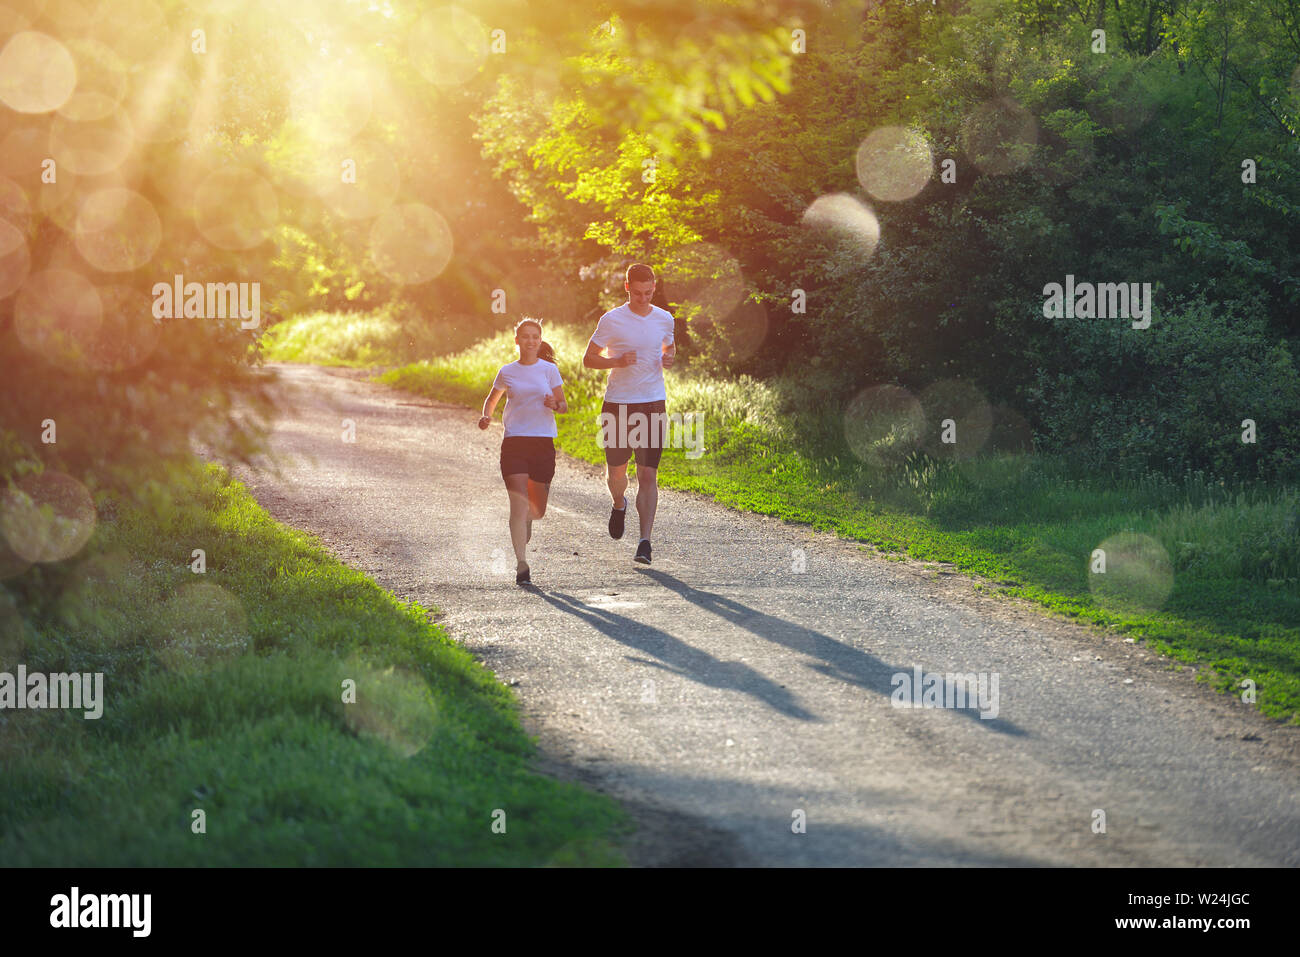 Young people jogging and exercising in nature, in morning sunrise warm light Stock Photo